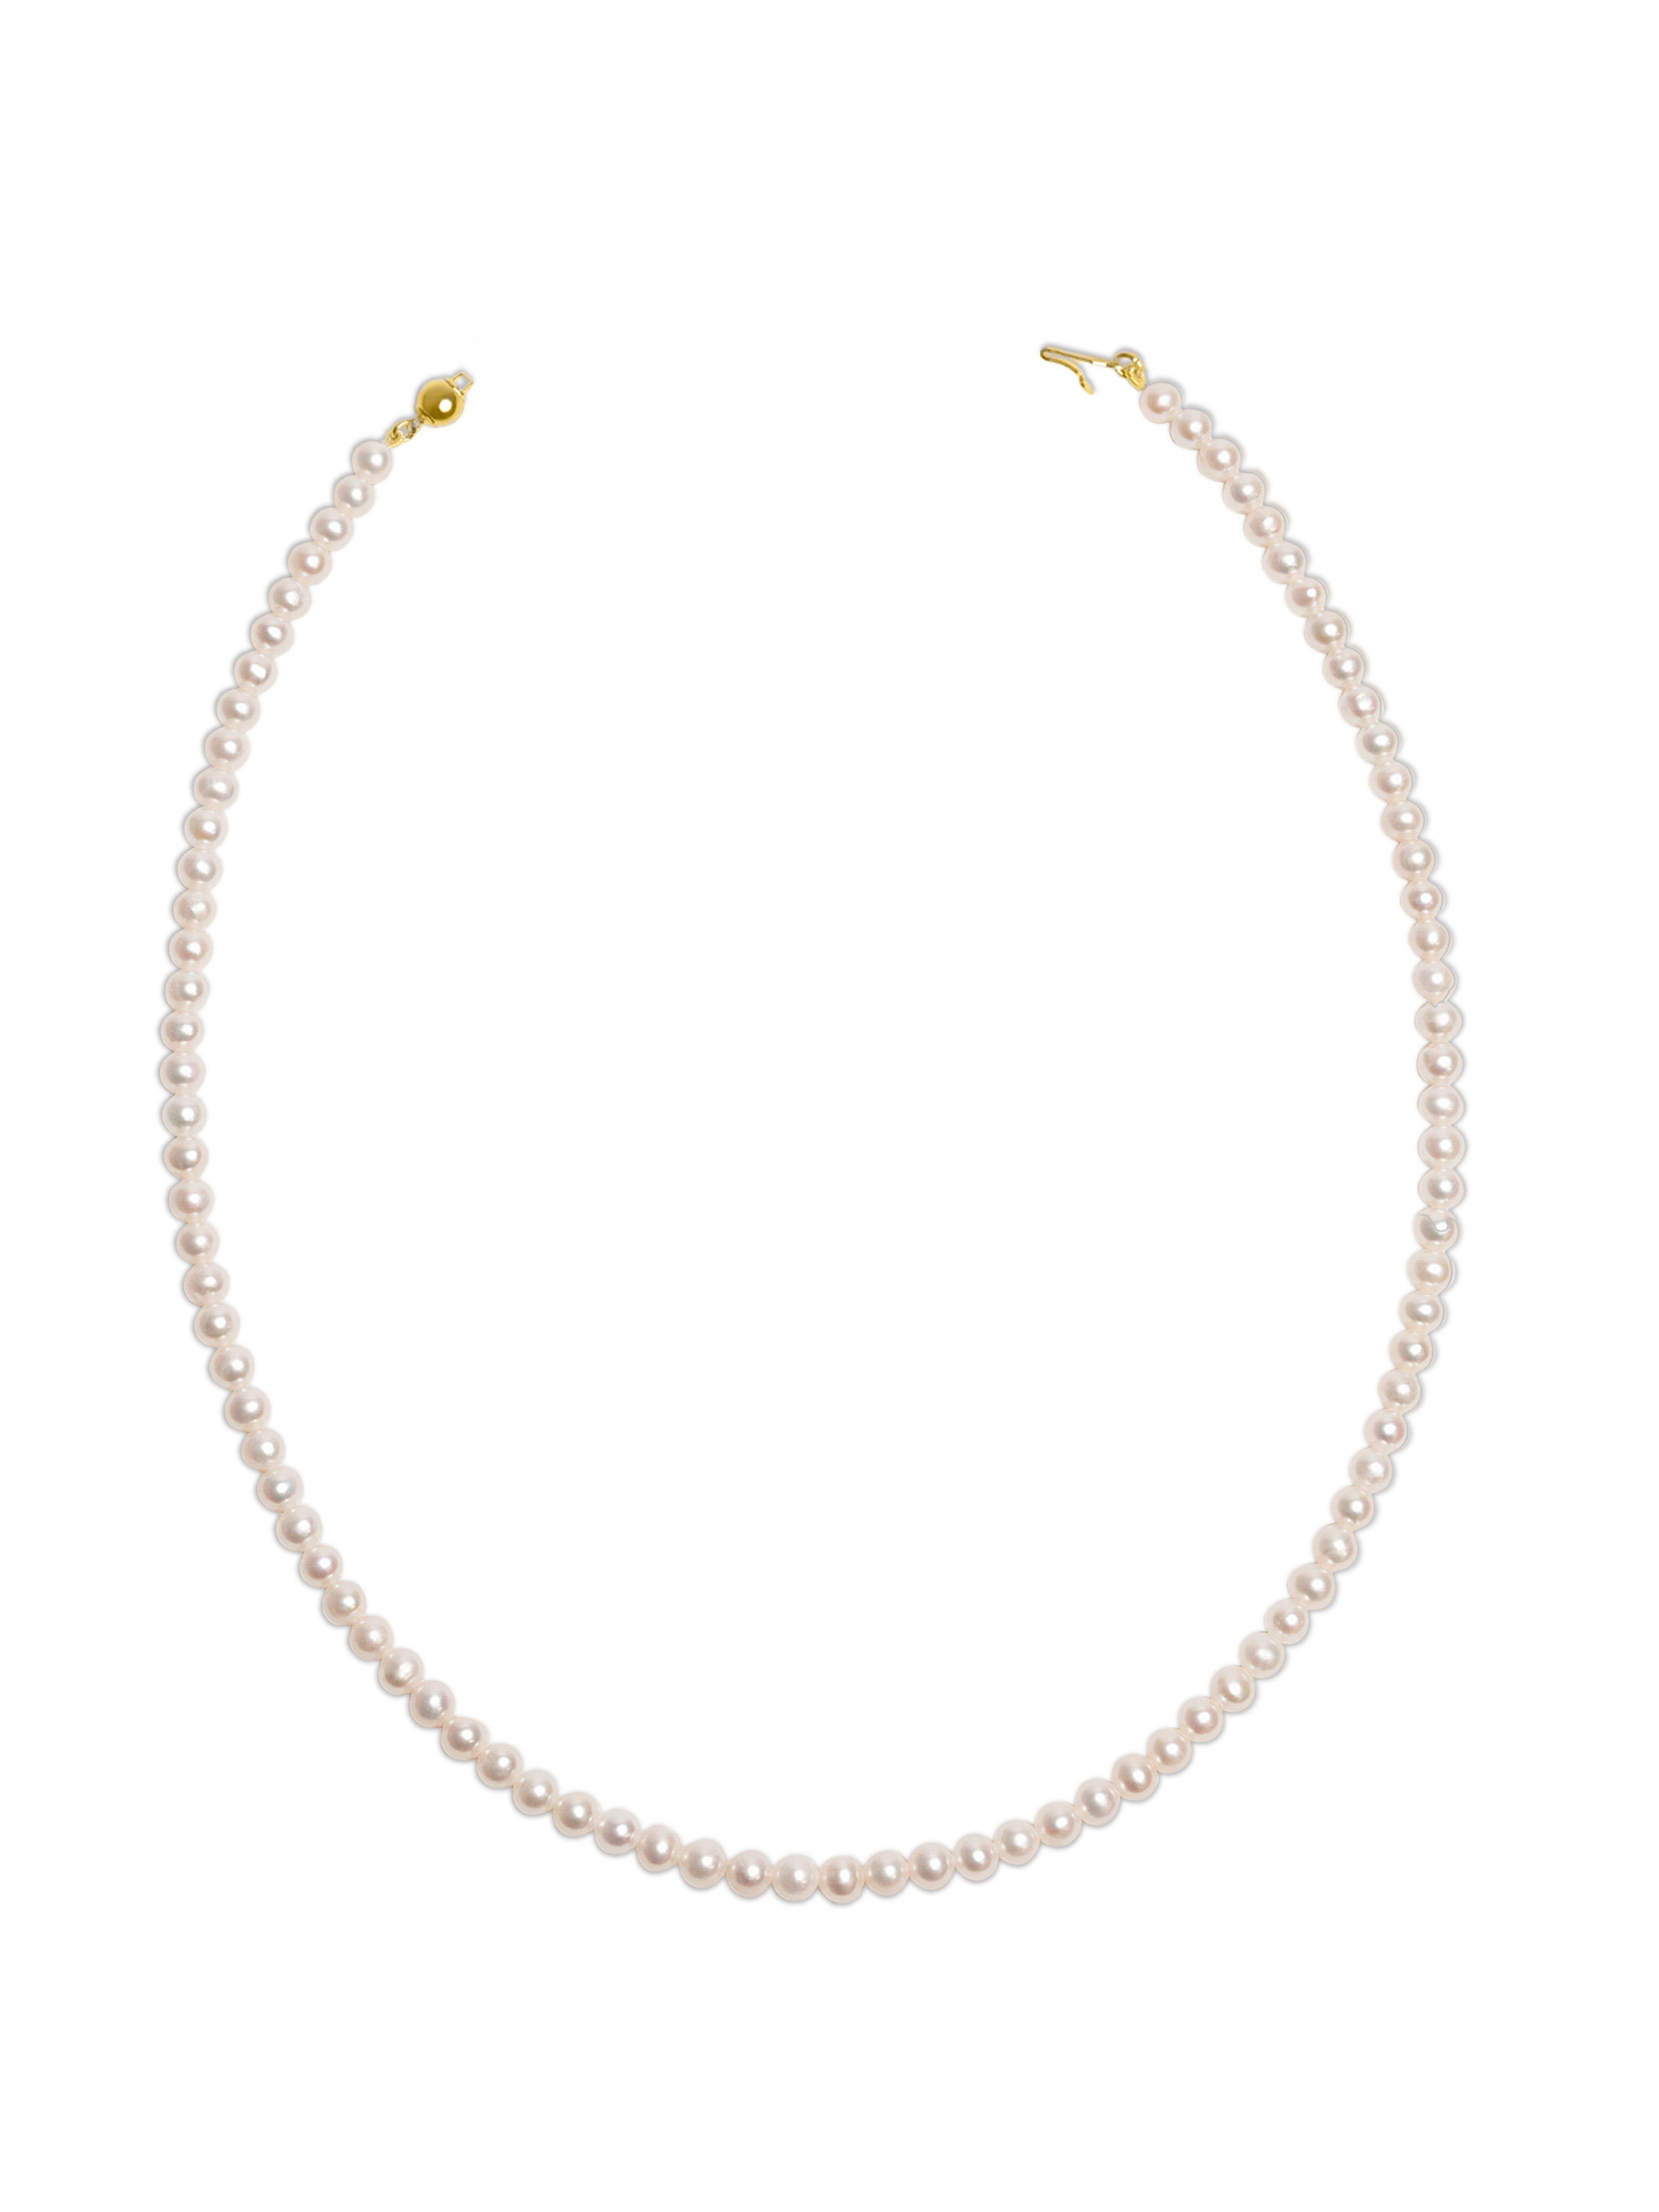 4.5-5.0mm AAA Freshwater Cultured Pearl Necklace, 60cm Long | 18K Gold